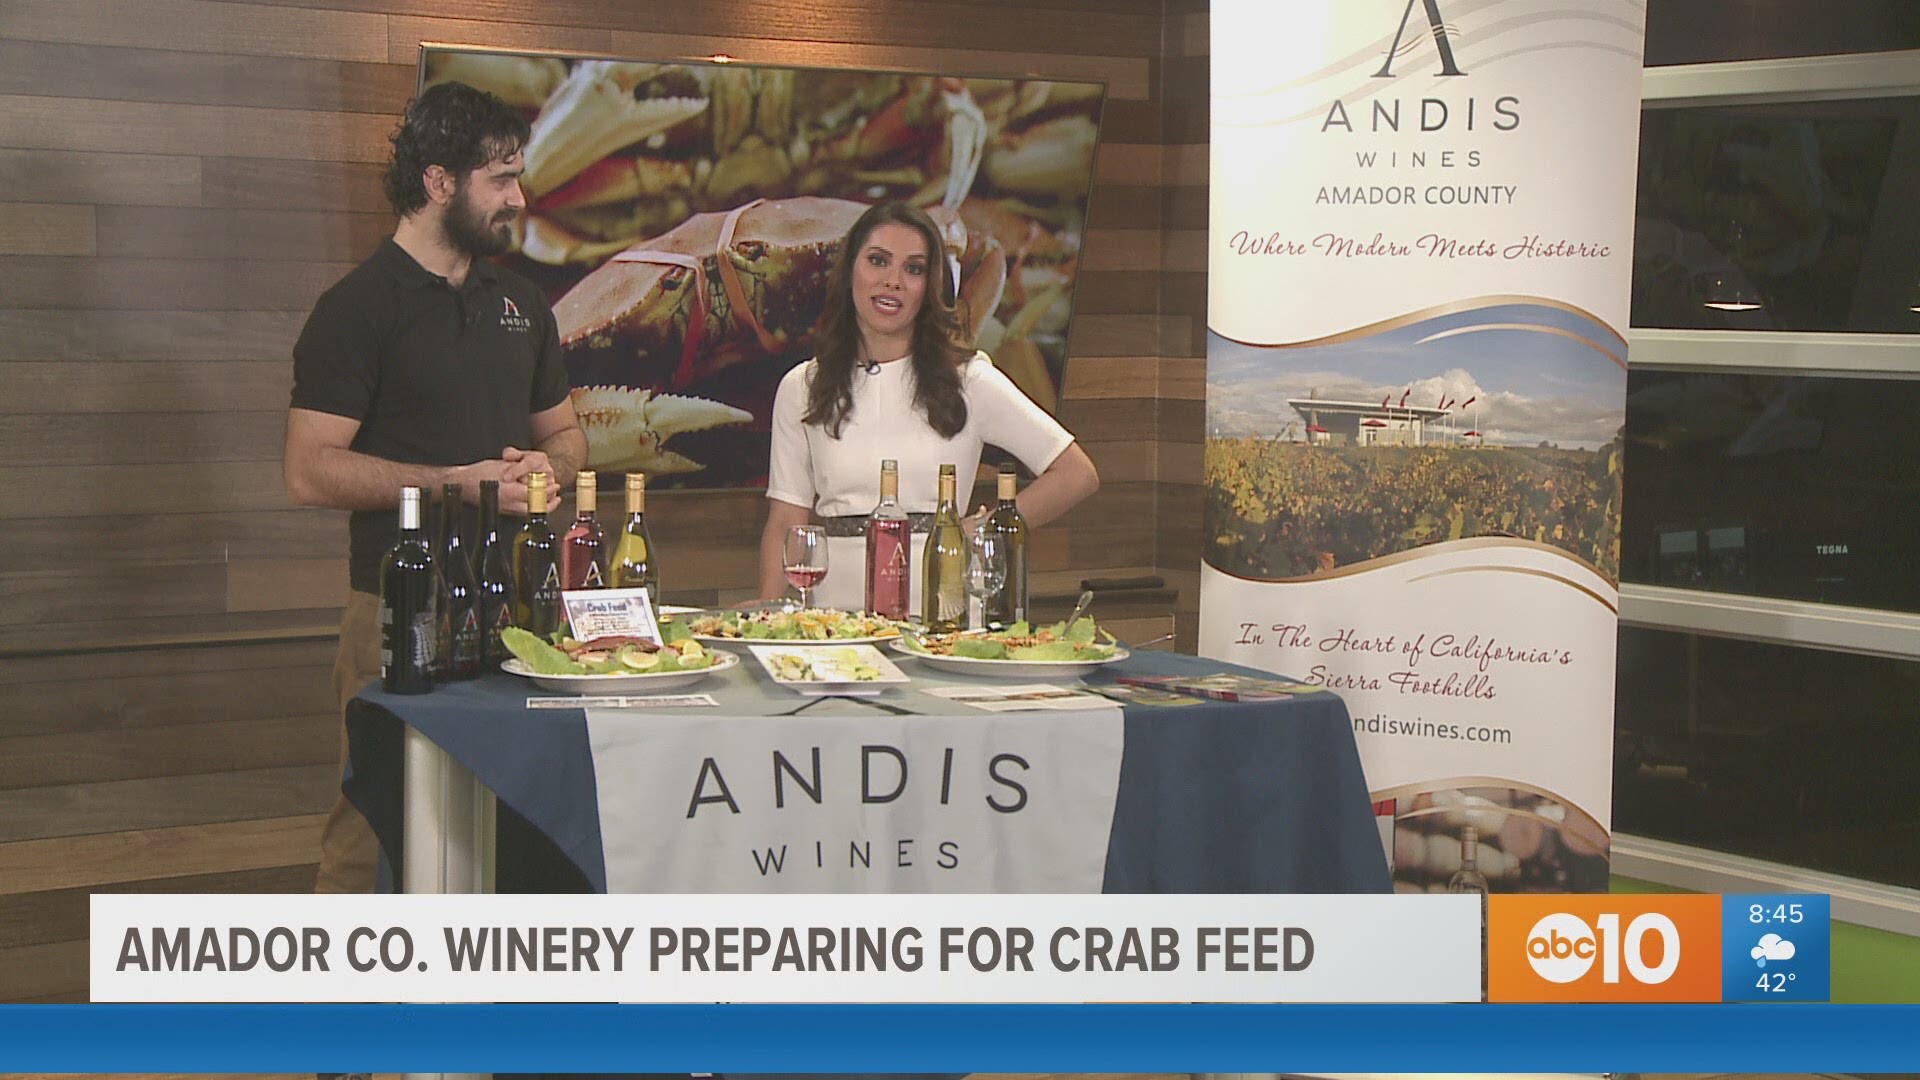 Lorenzo Muslia, from Andis Wines in Plymouth (Amador County), talks about the upcoming Annual Crab Feed and White Wines Release Party, and shows off some of his mouth-watering dishes and wines.